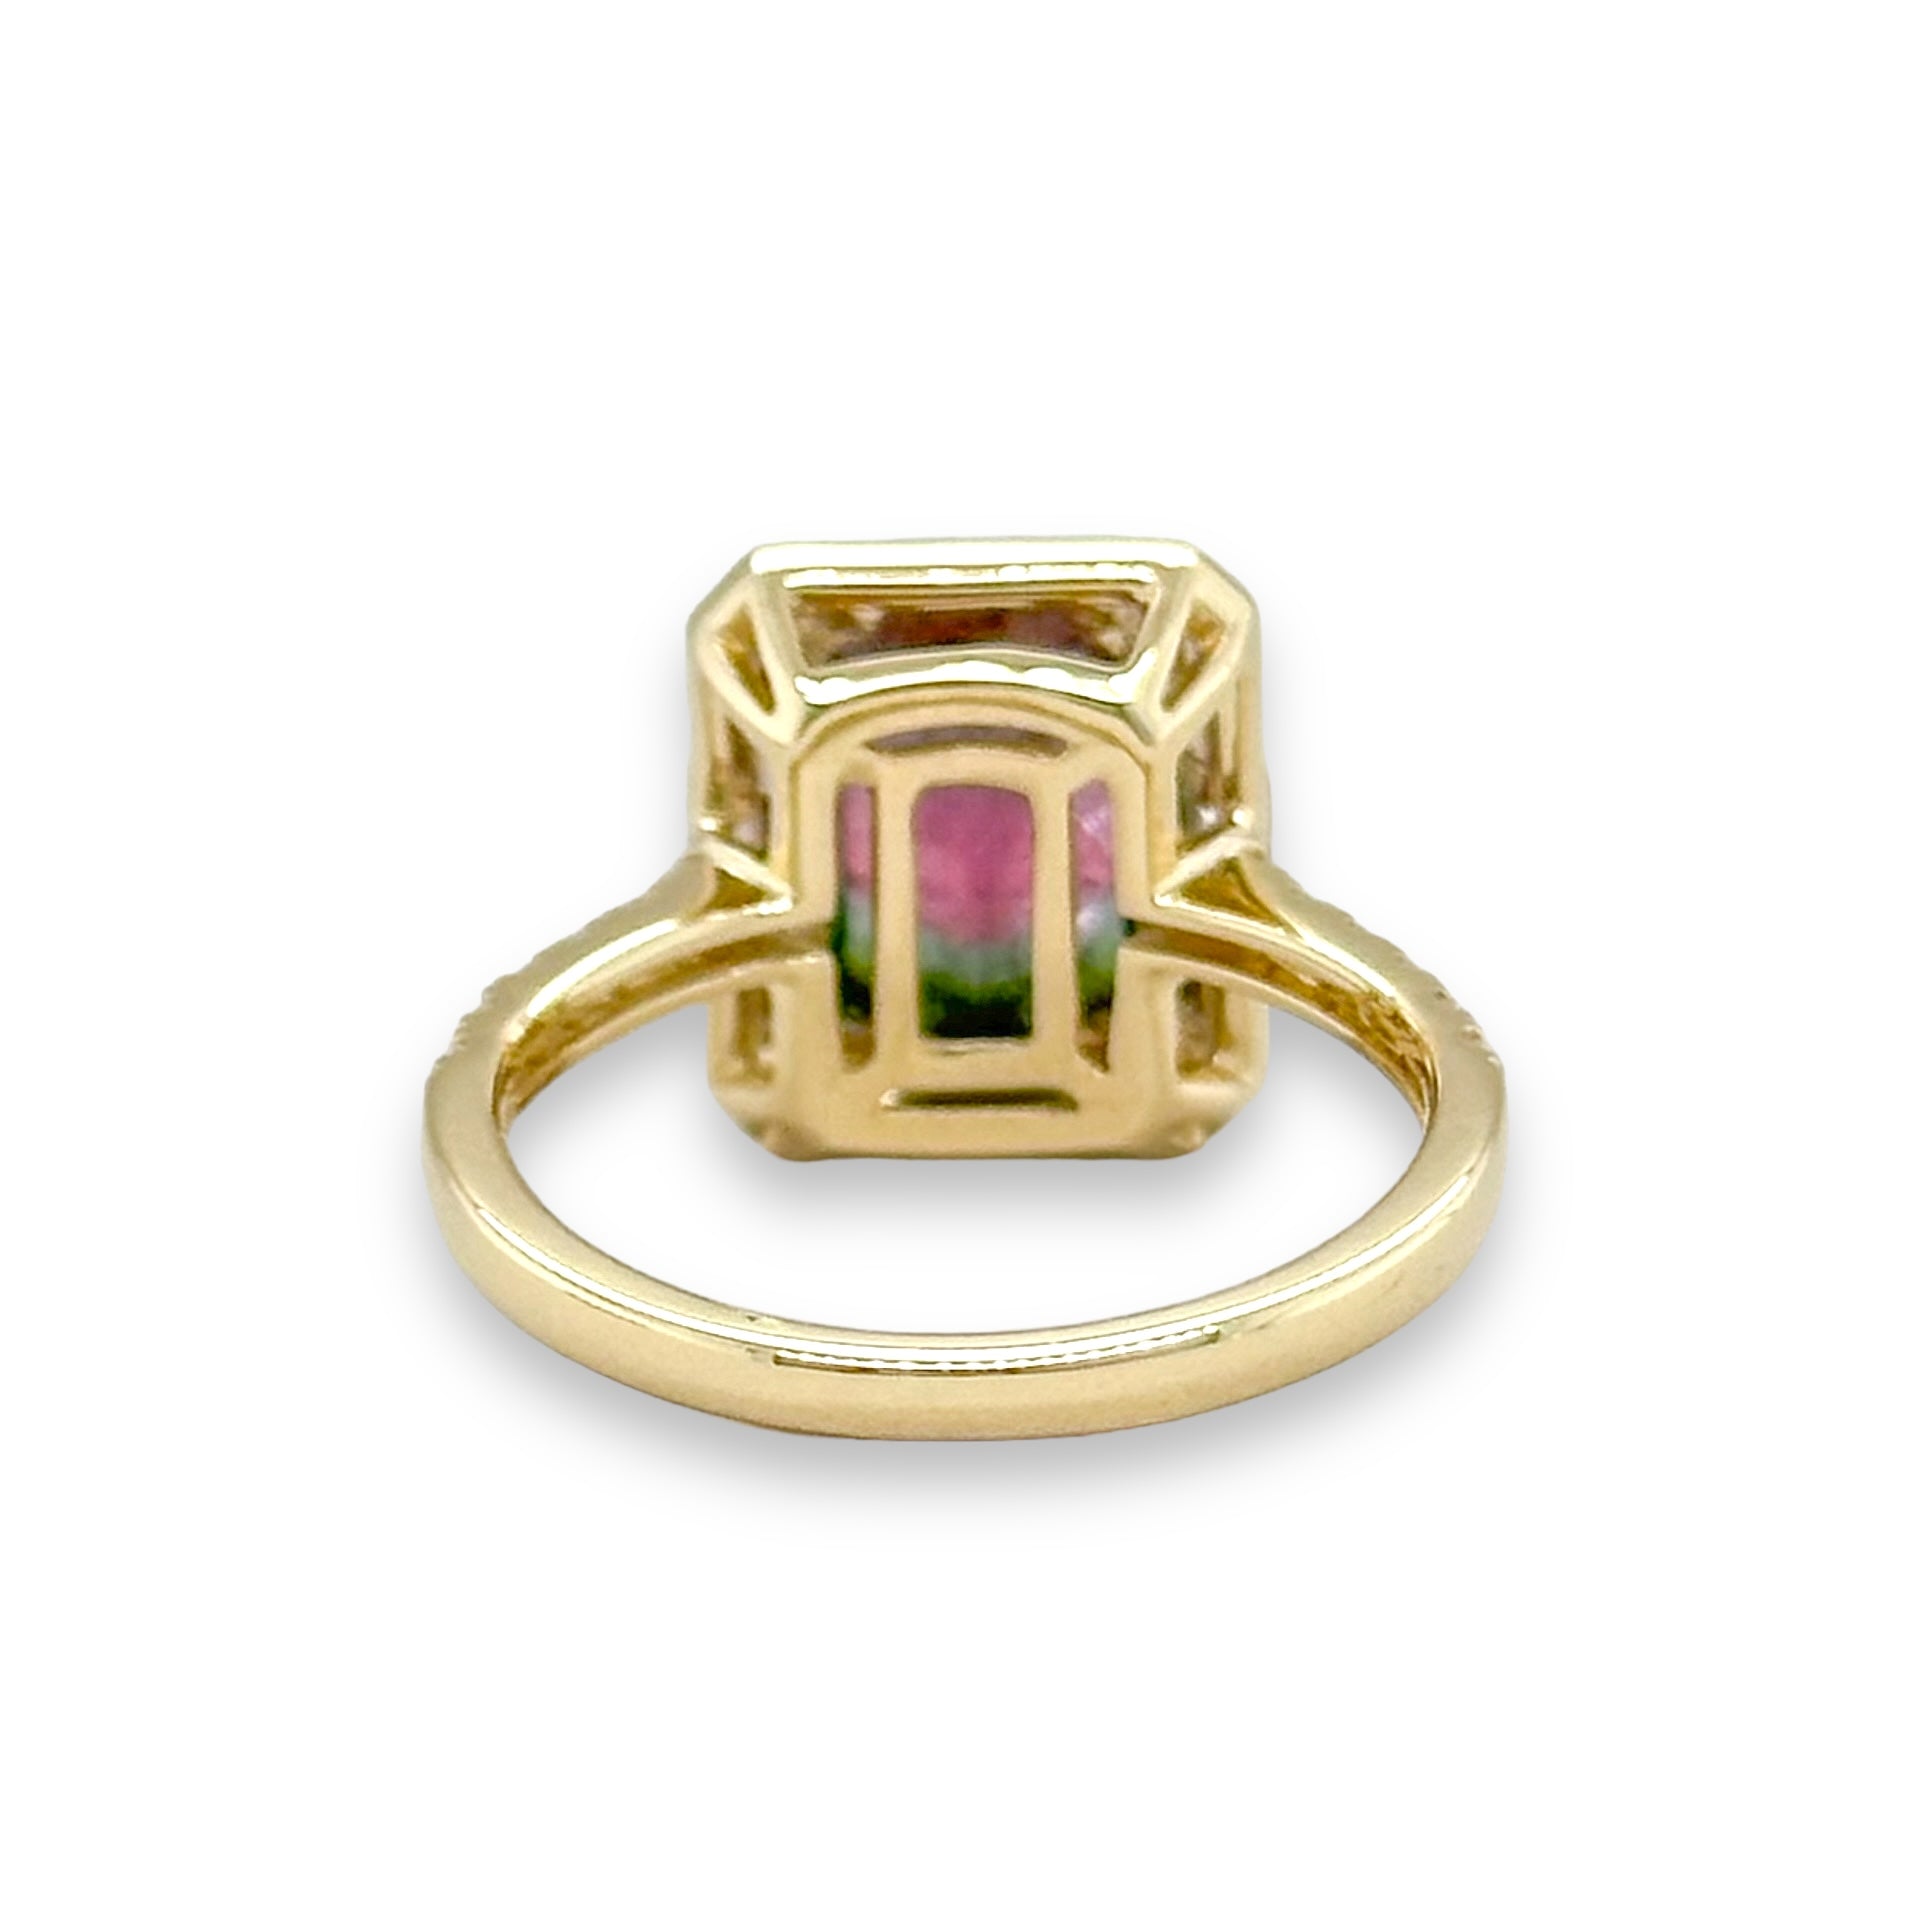 14K Y Gold 0.34ctw Diamonds and 2.22ct Tourmaline Ring